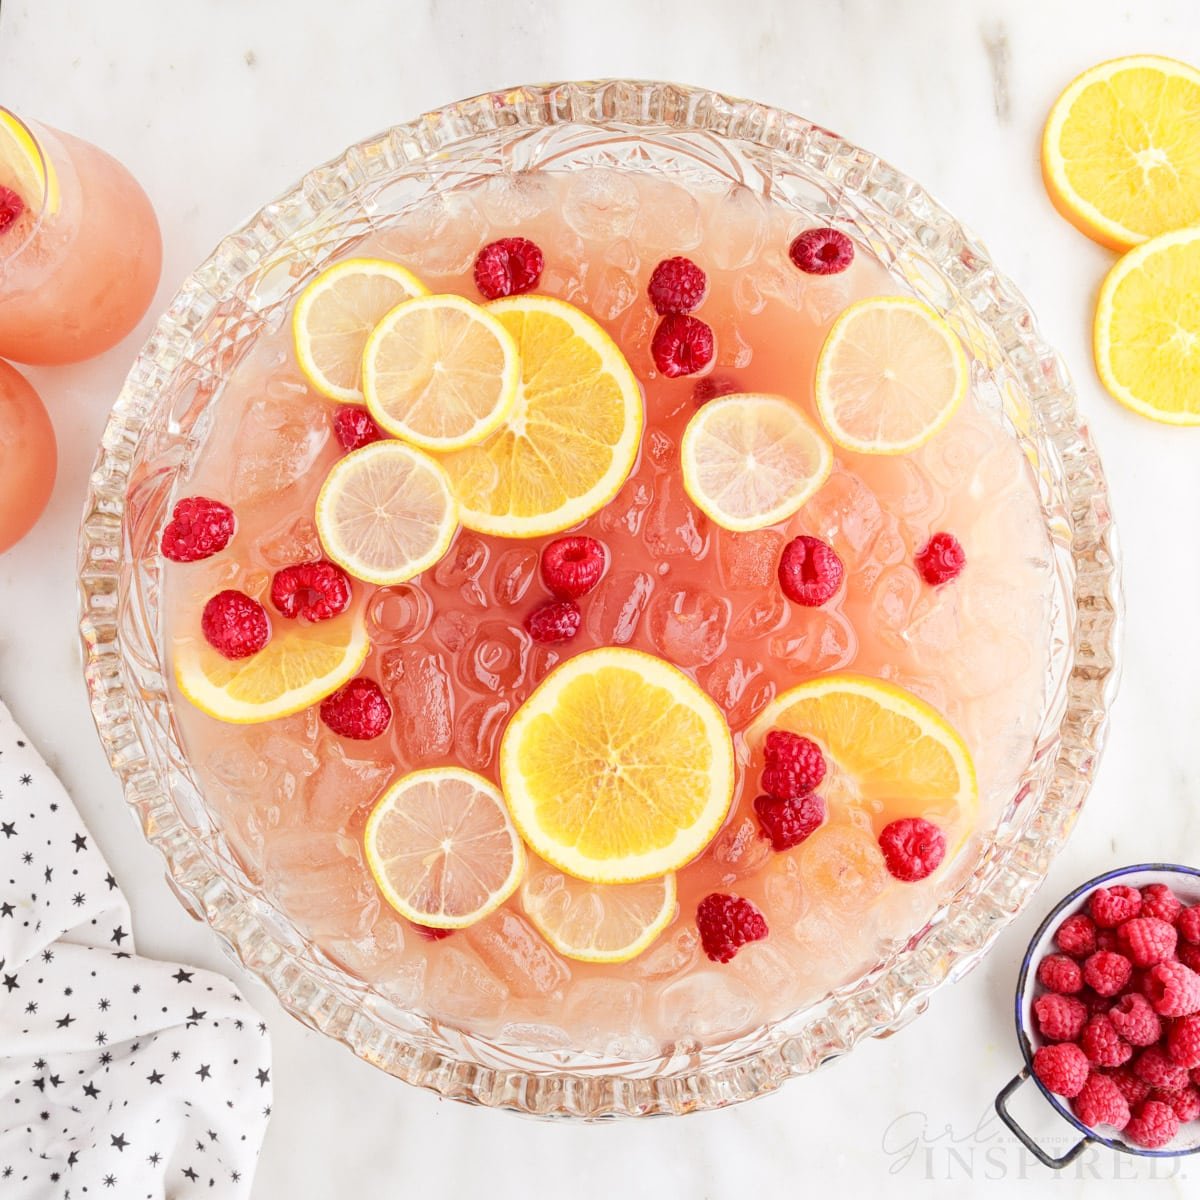 Party Punch (Fruit Punch Recipe) - Together as Family